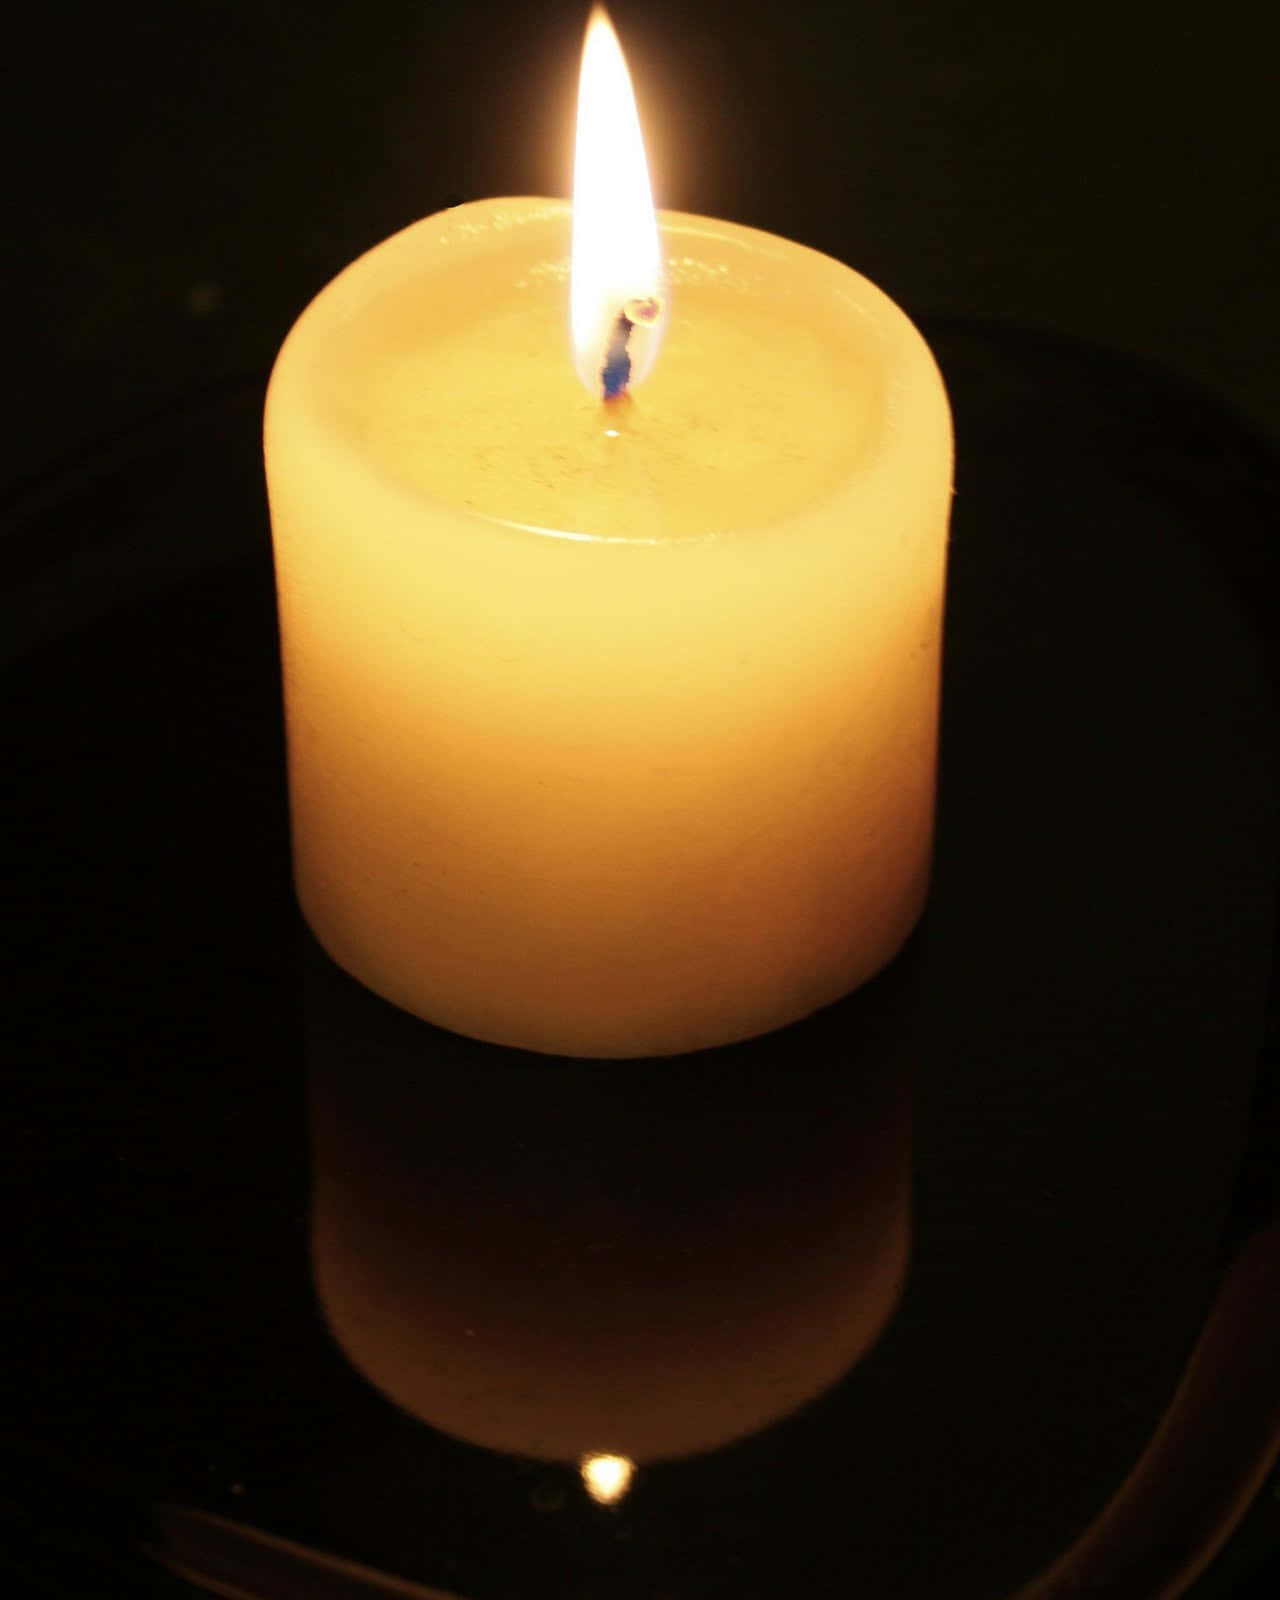 A single candle burning brightly in the dark